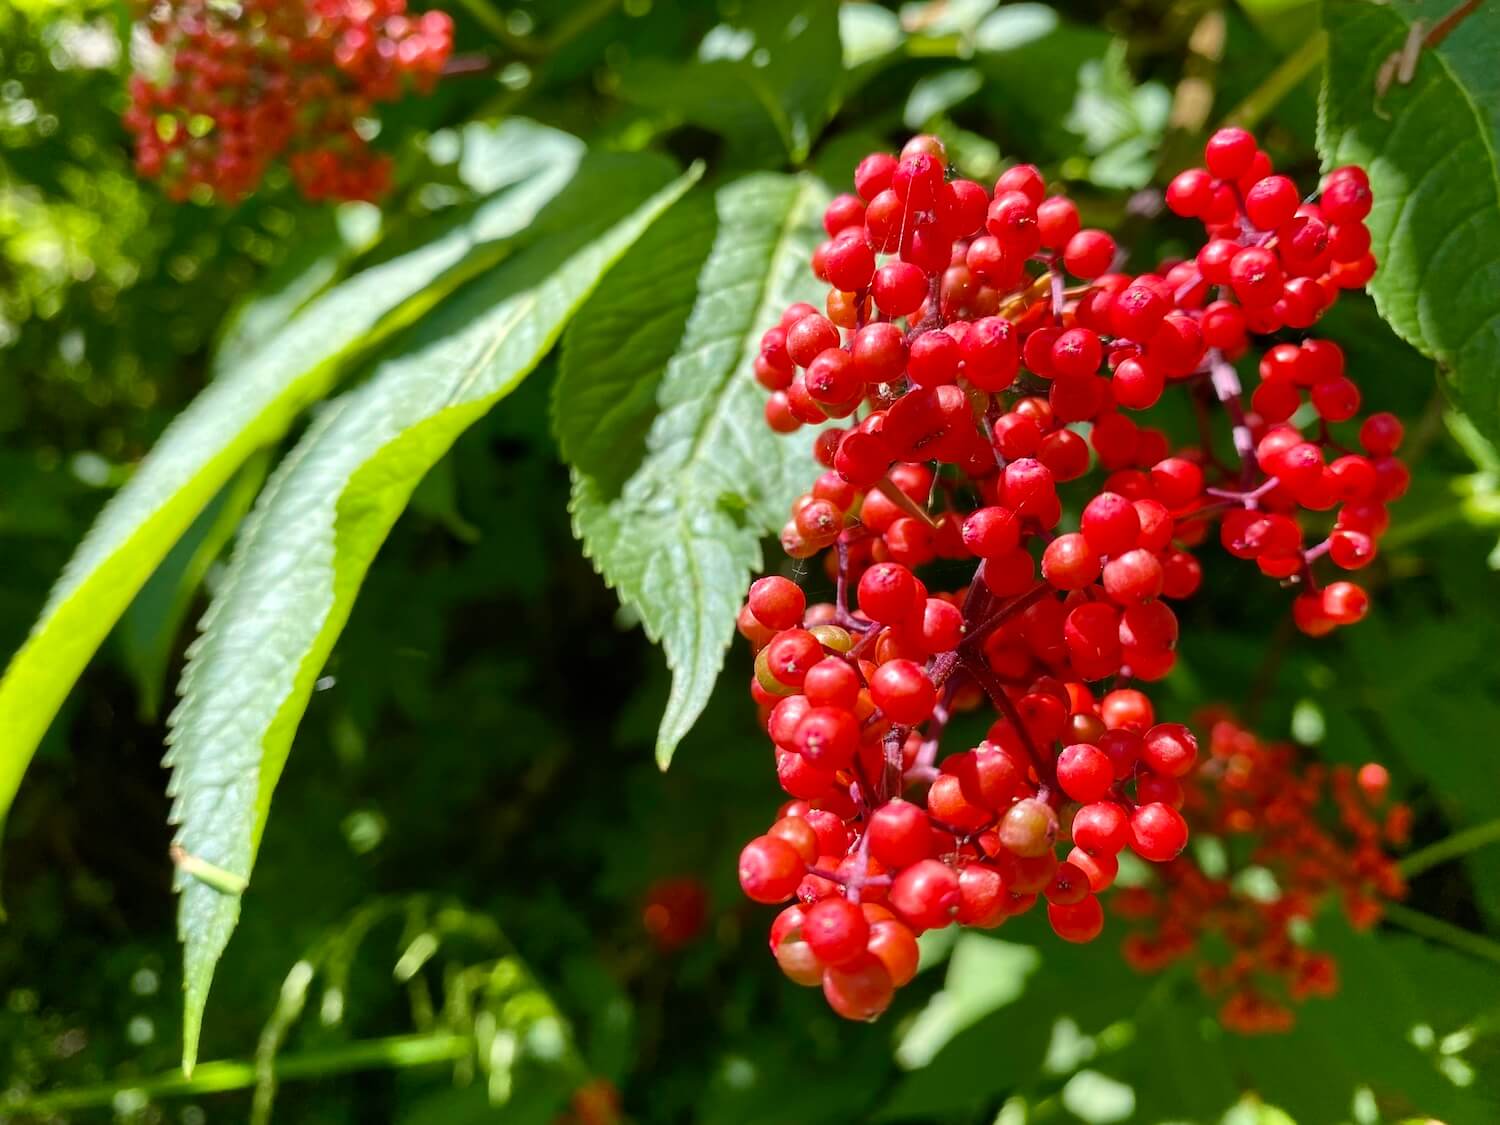 Bright red berries form a large bunch hanging to a green bush with sun shining on the leaves.